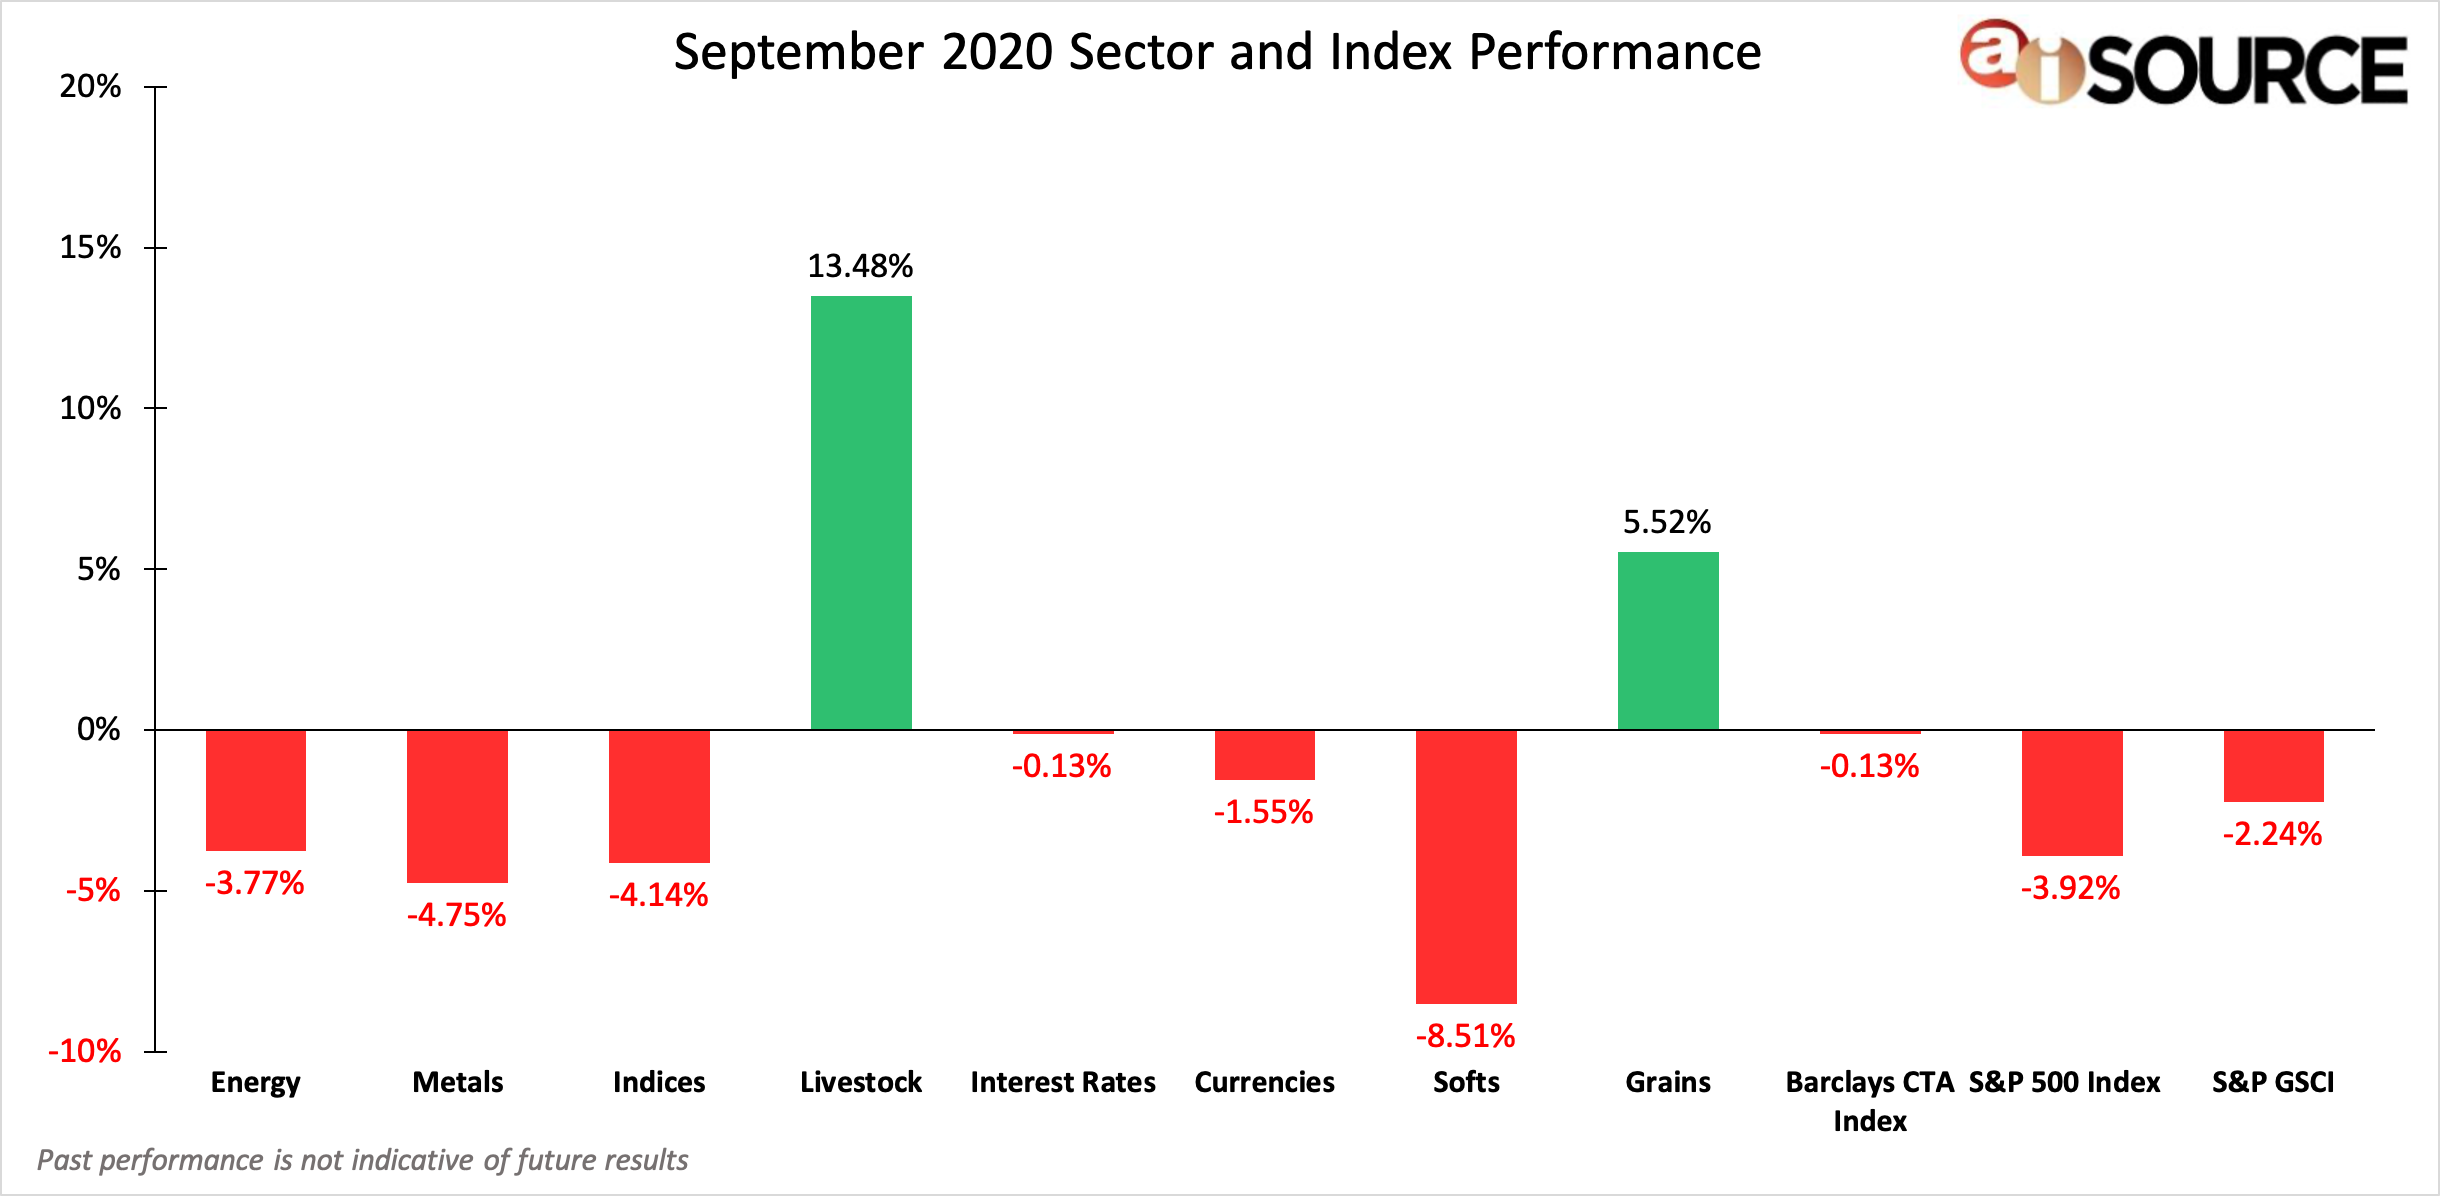 September 2020 Sector and Index Performance